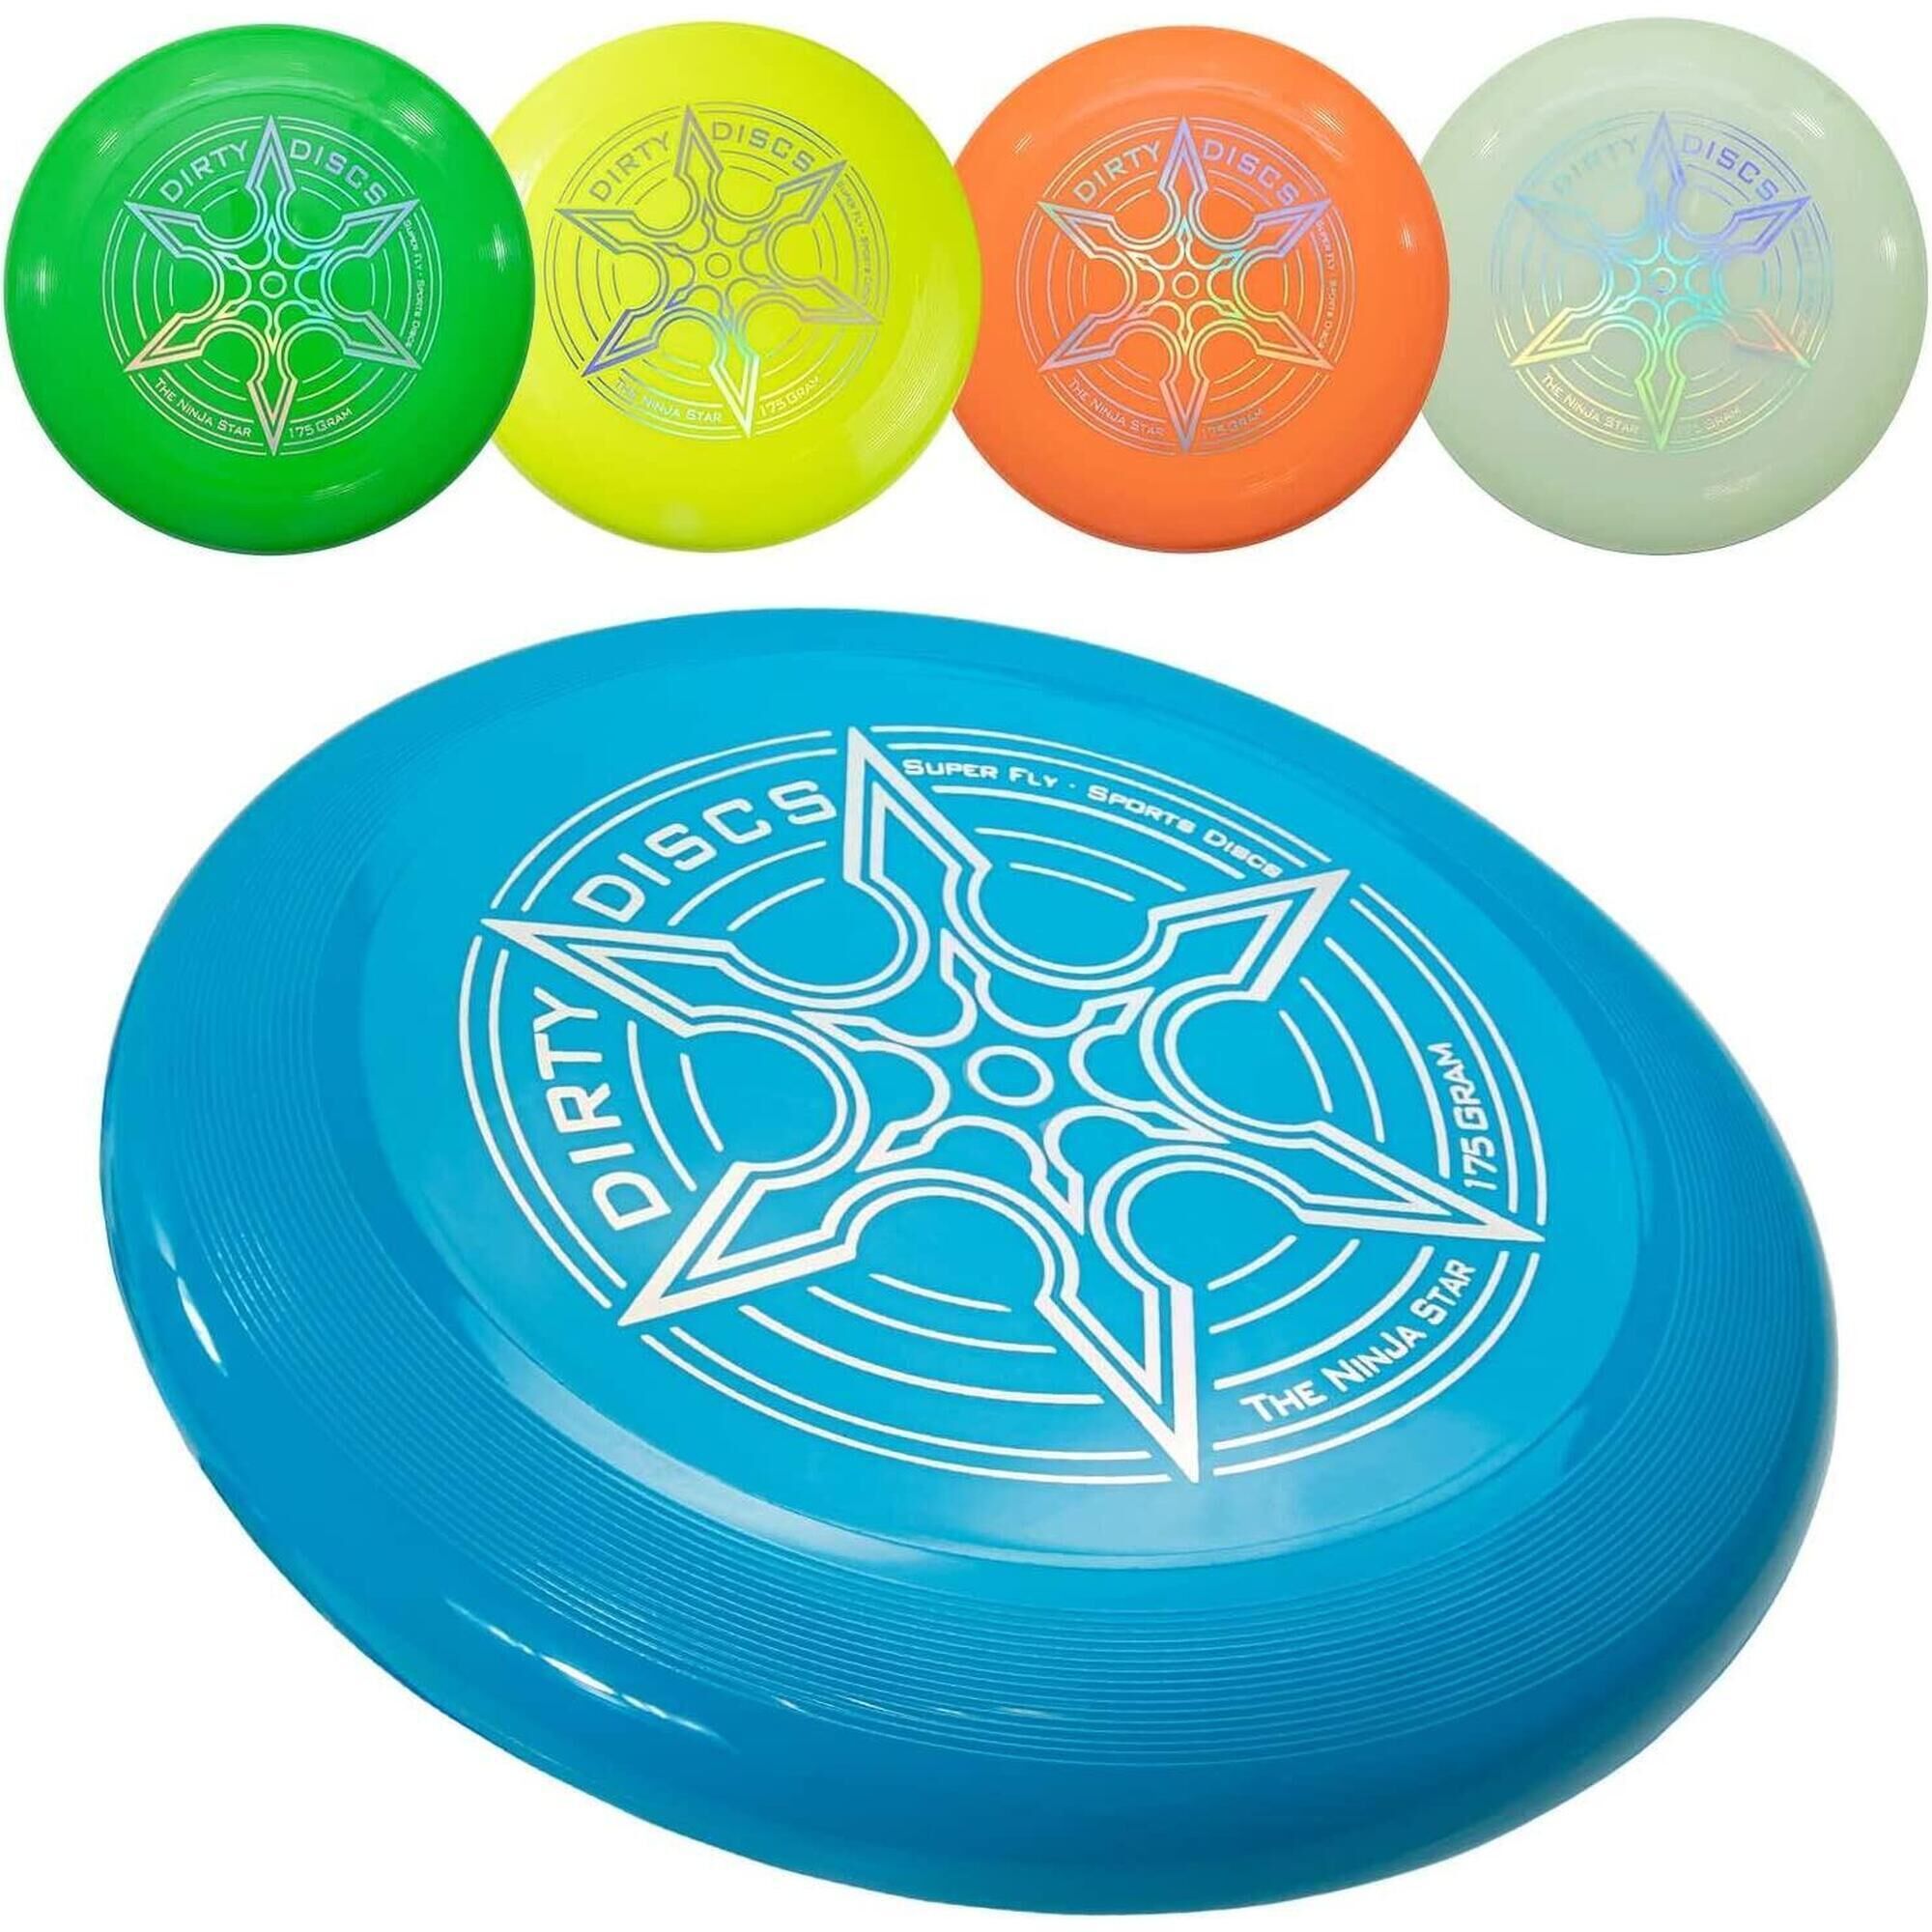 INDY Indy - Dirty Disc Frisbee, Professional Throwing Disc for Adults, Childre